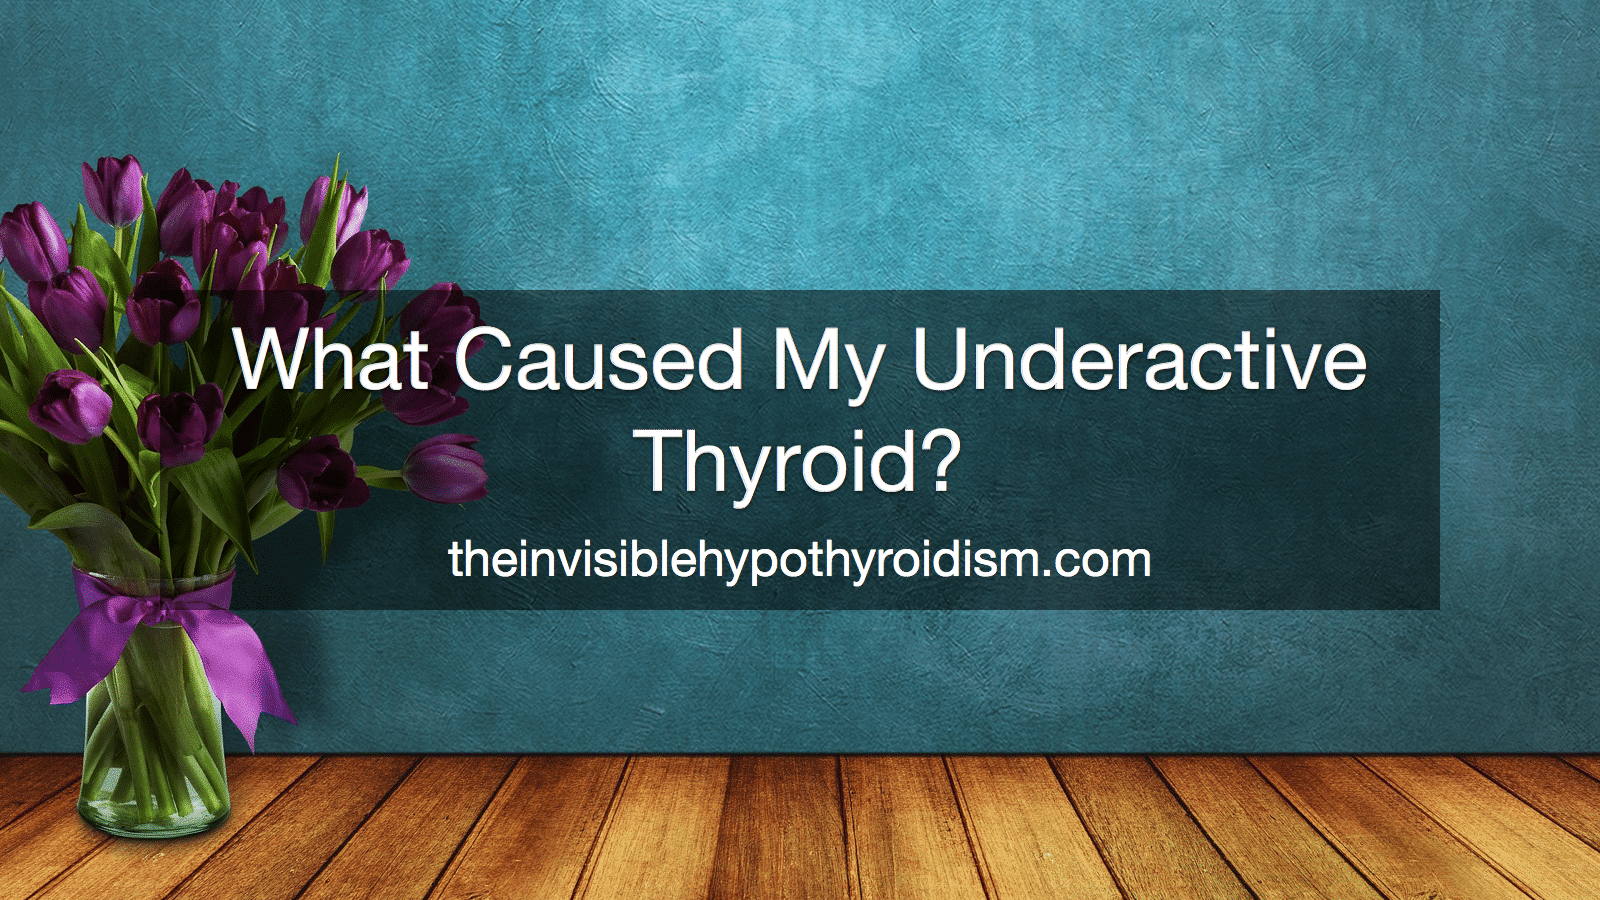 What Caused My Underactive Thyroid?